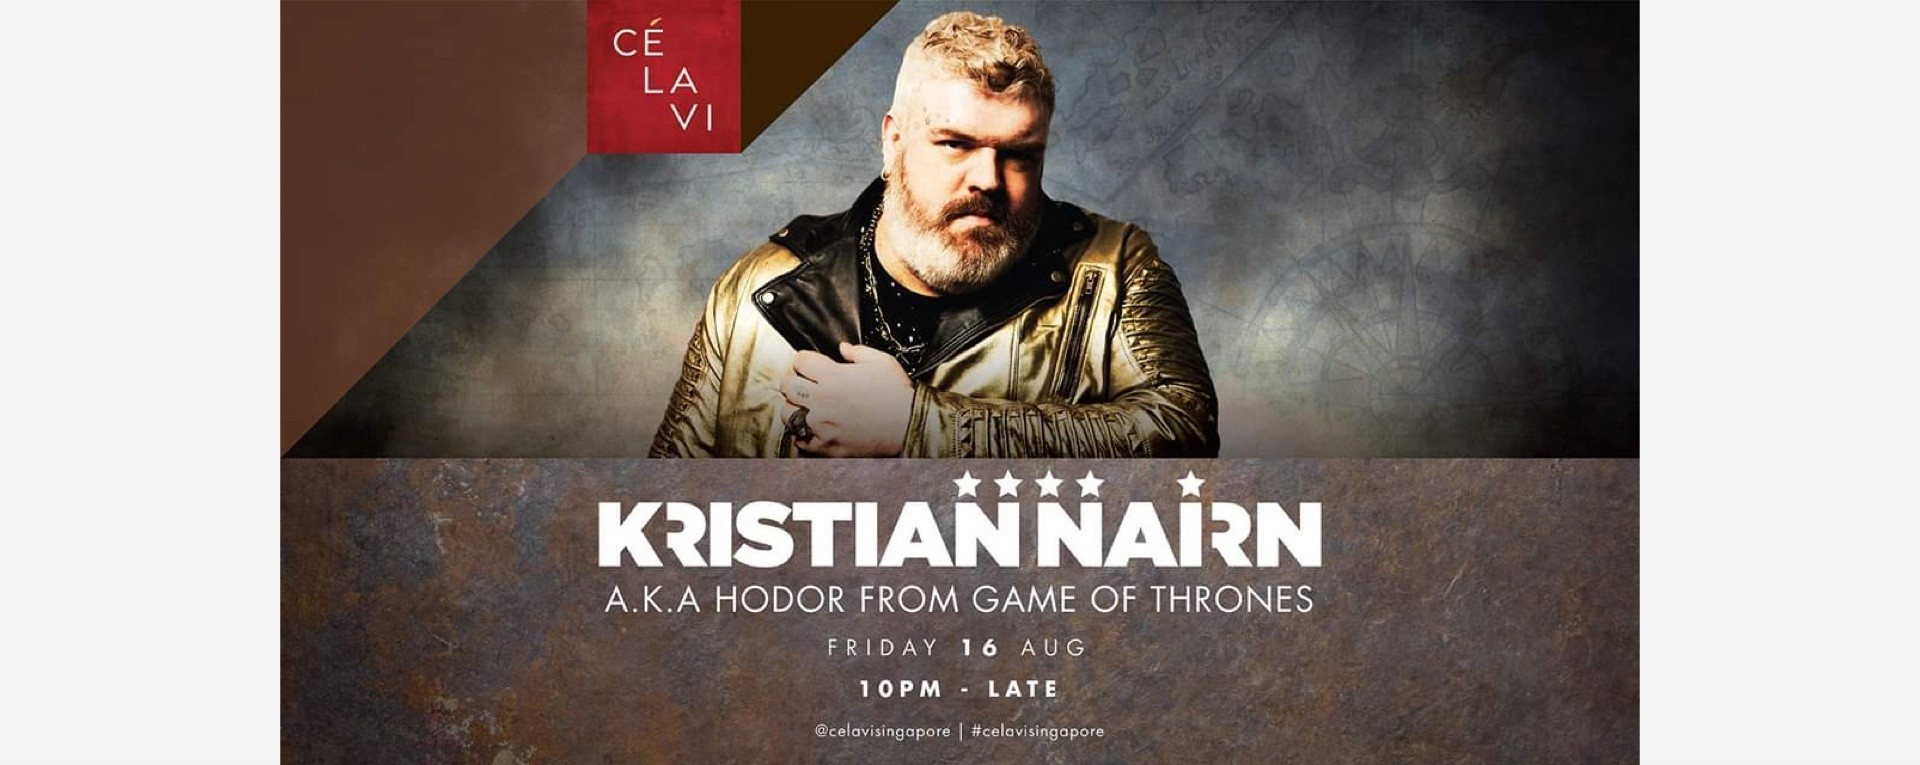 CÉ LA VI presents Kristian Nairn AKA Hodor From Game Of Thrones [CANCELLED]